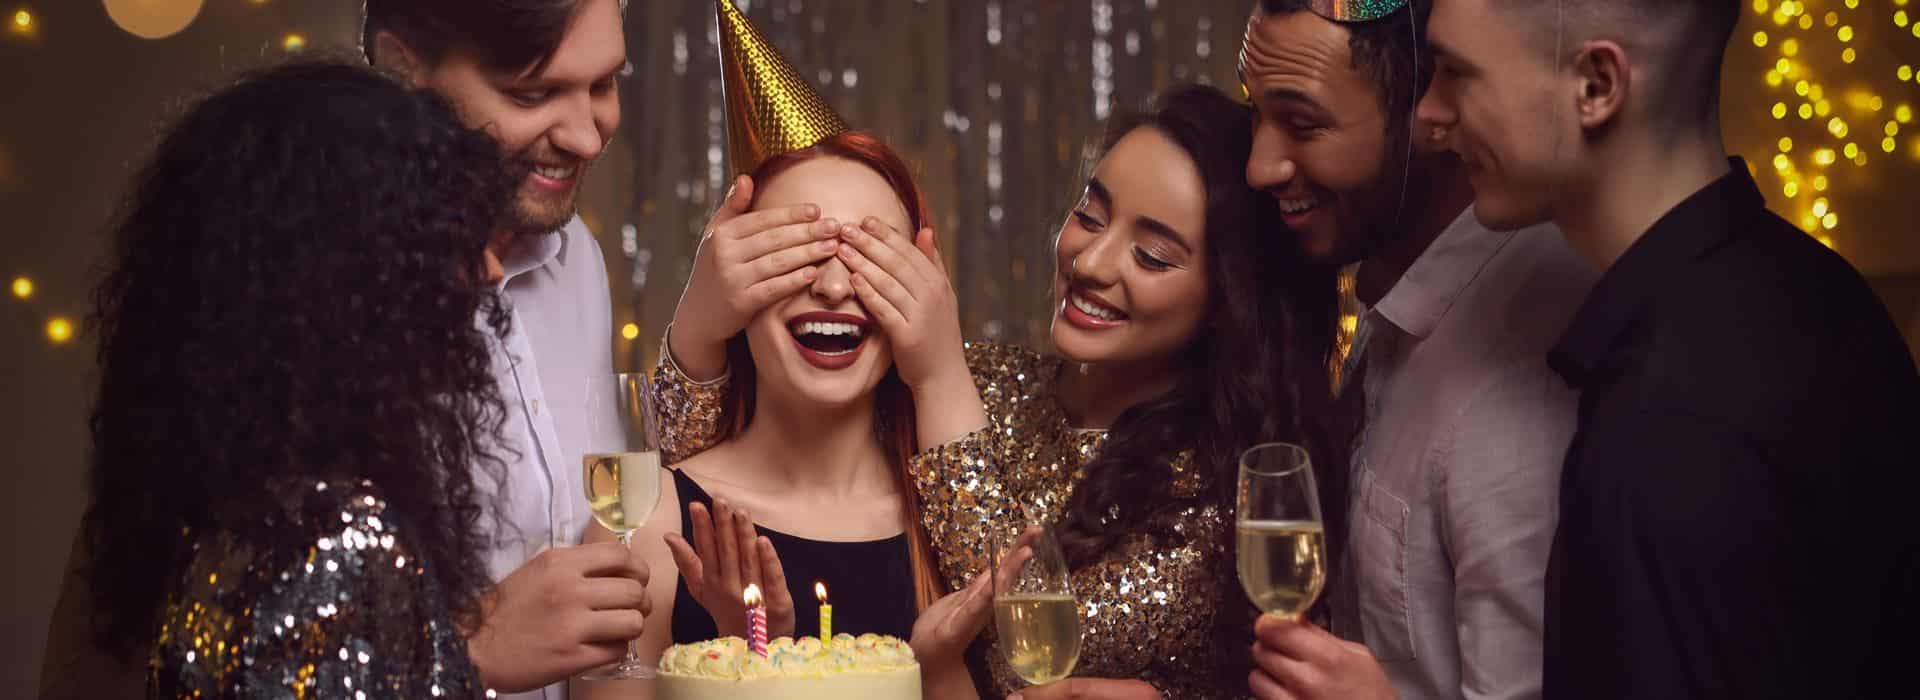 People dressed up for a birthday party surrounding the birthday girl in front of a cake with her eyes covered